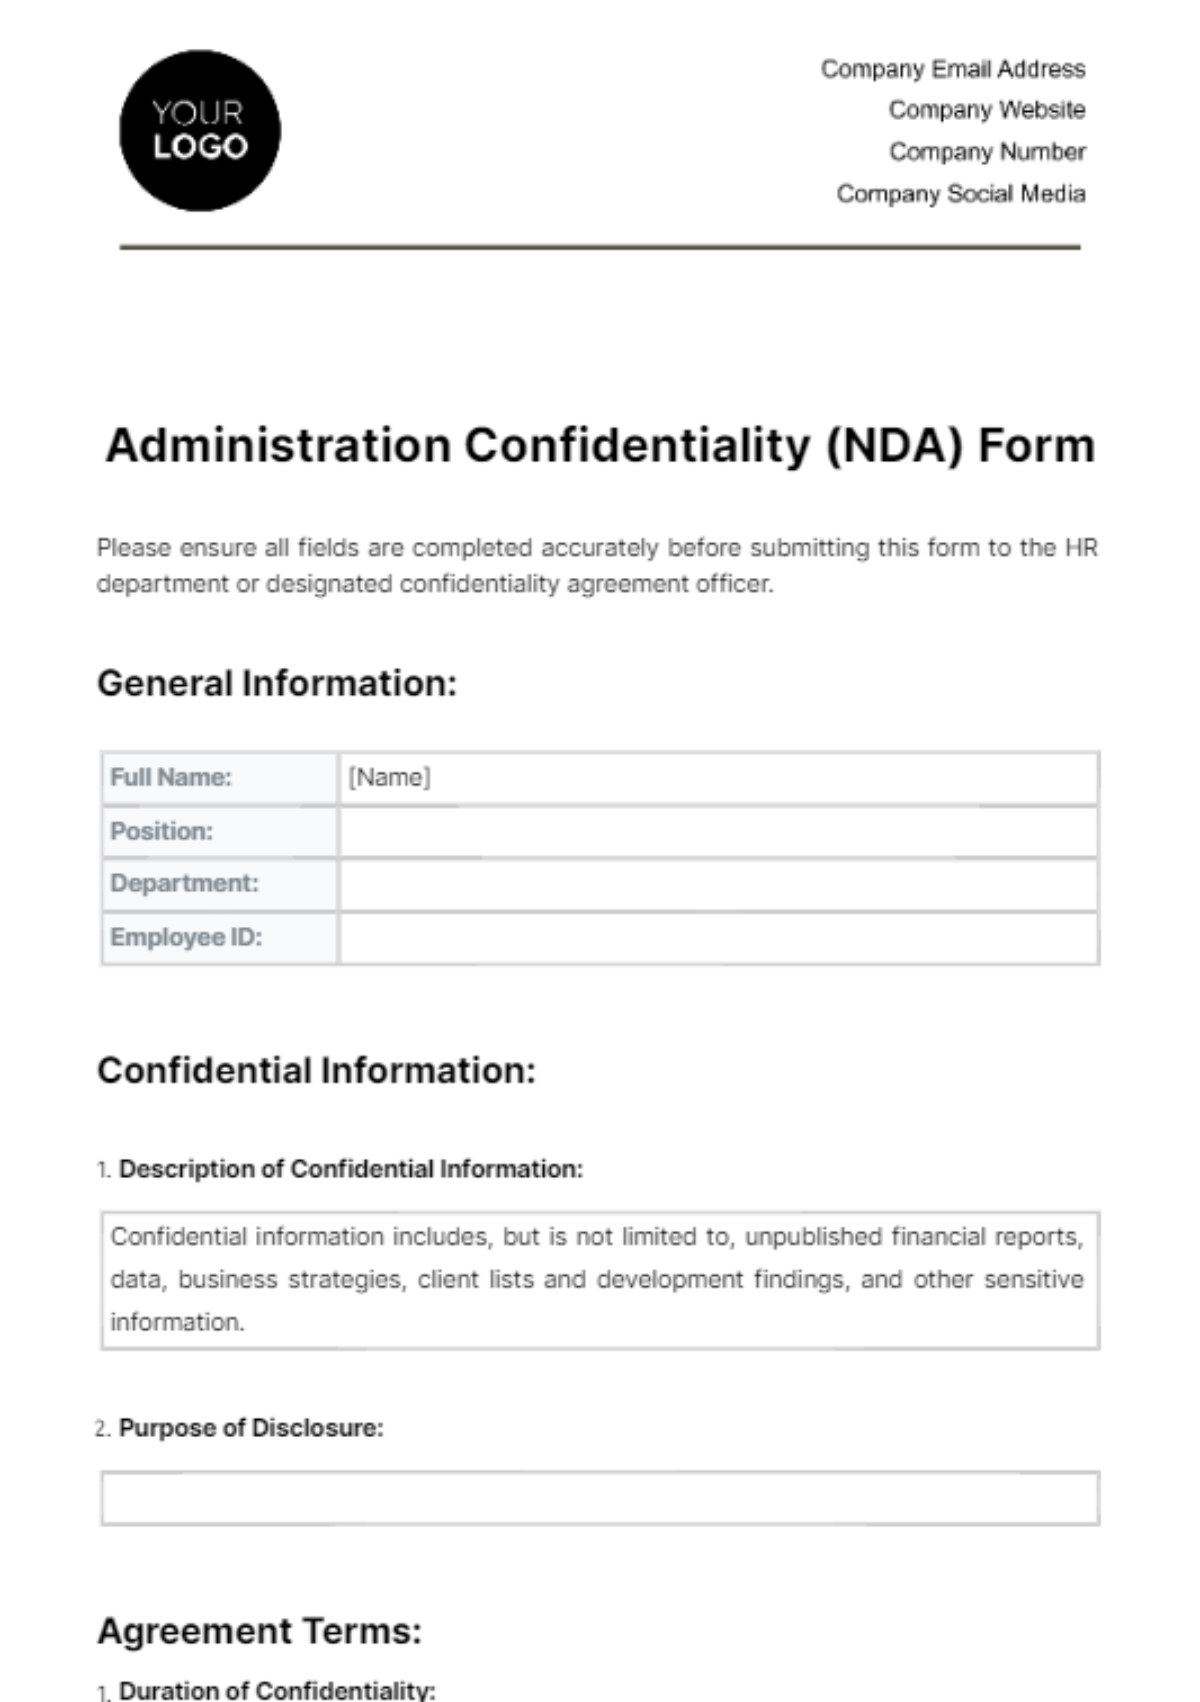 Free Administration Confidentiality (NDA) Form Template